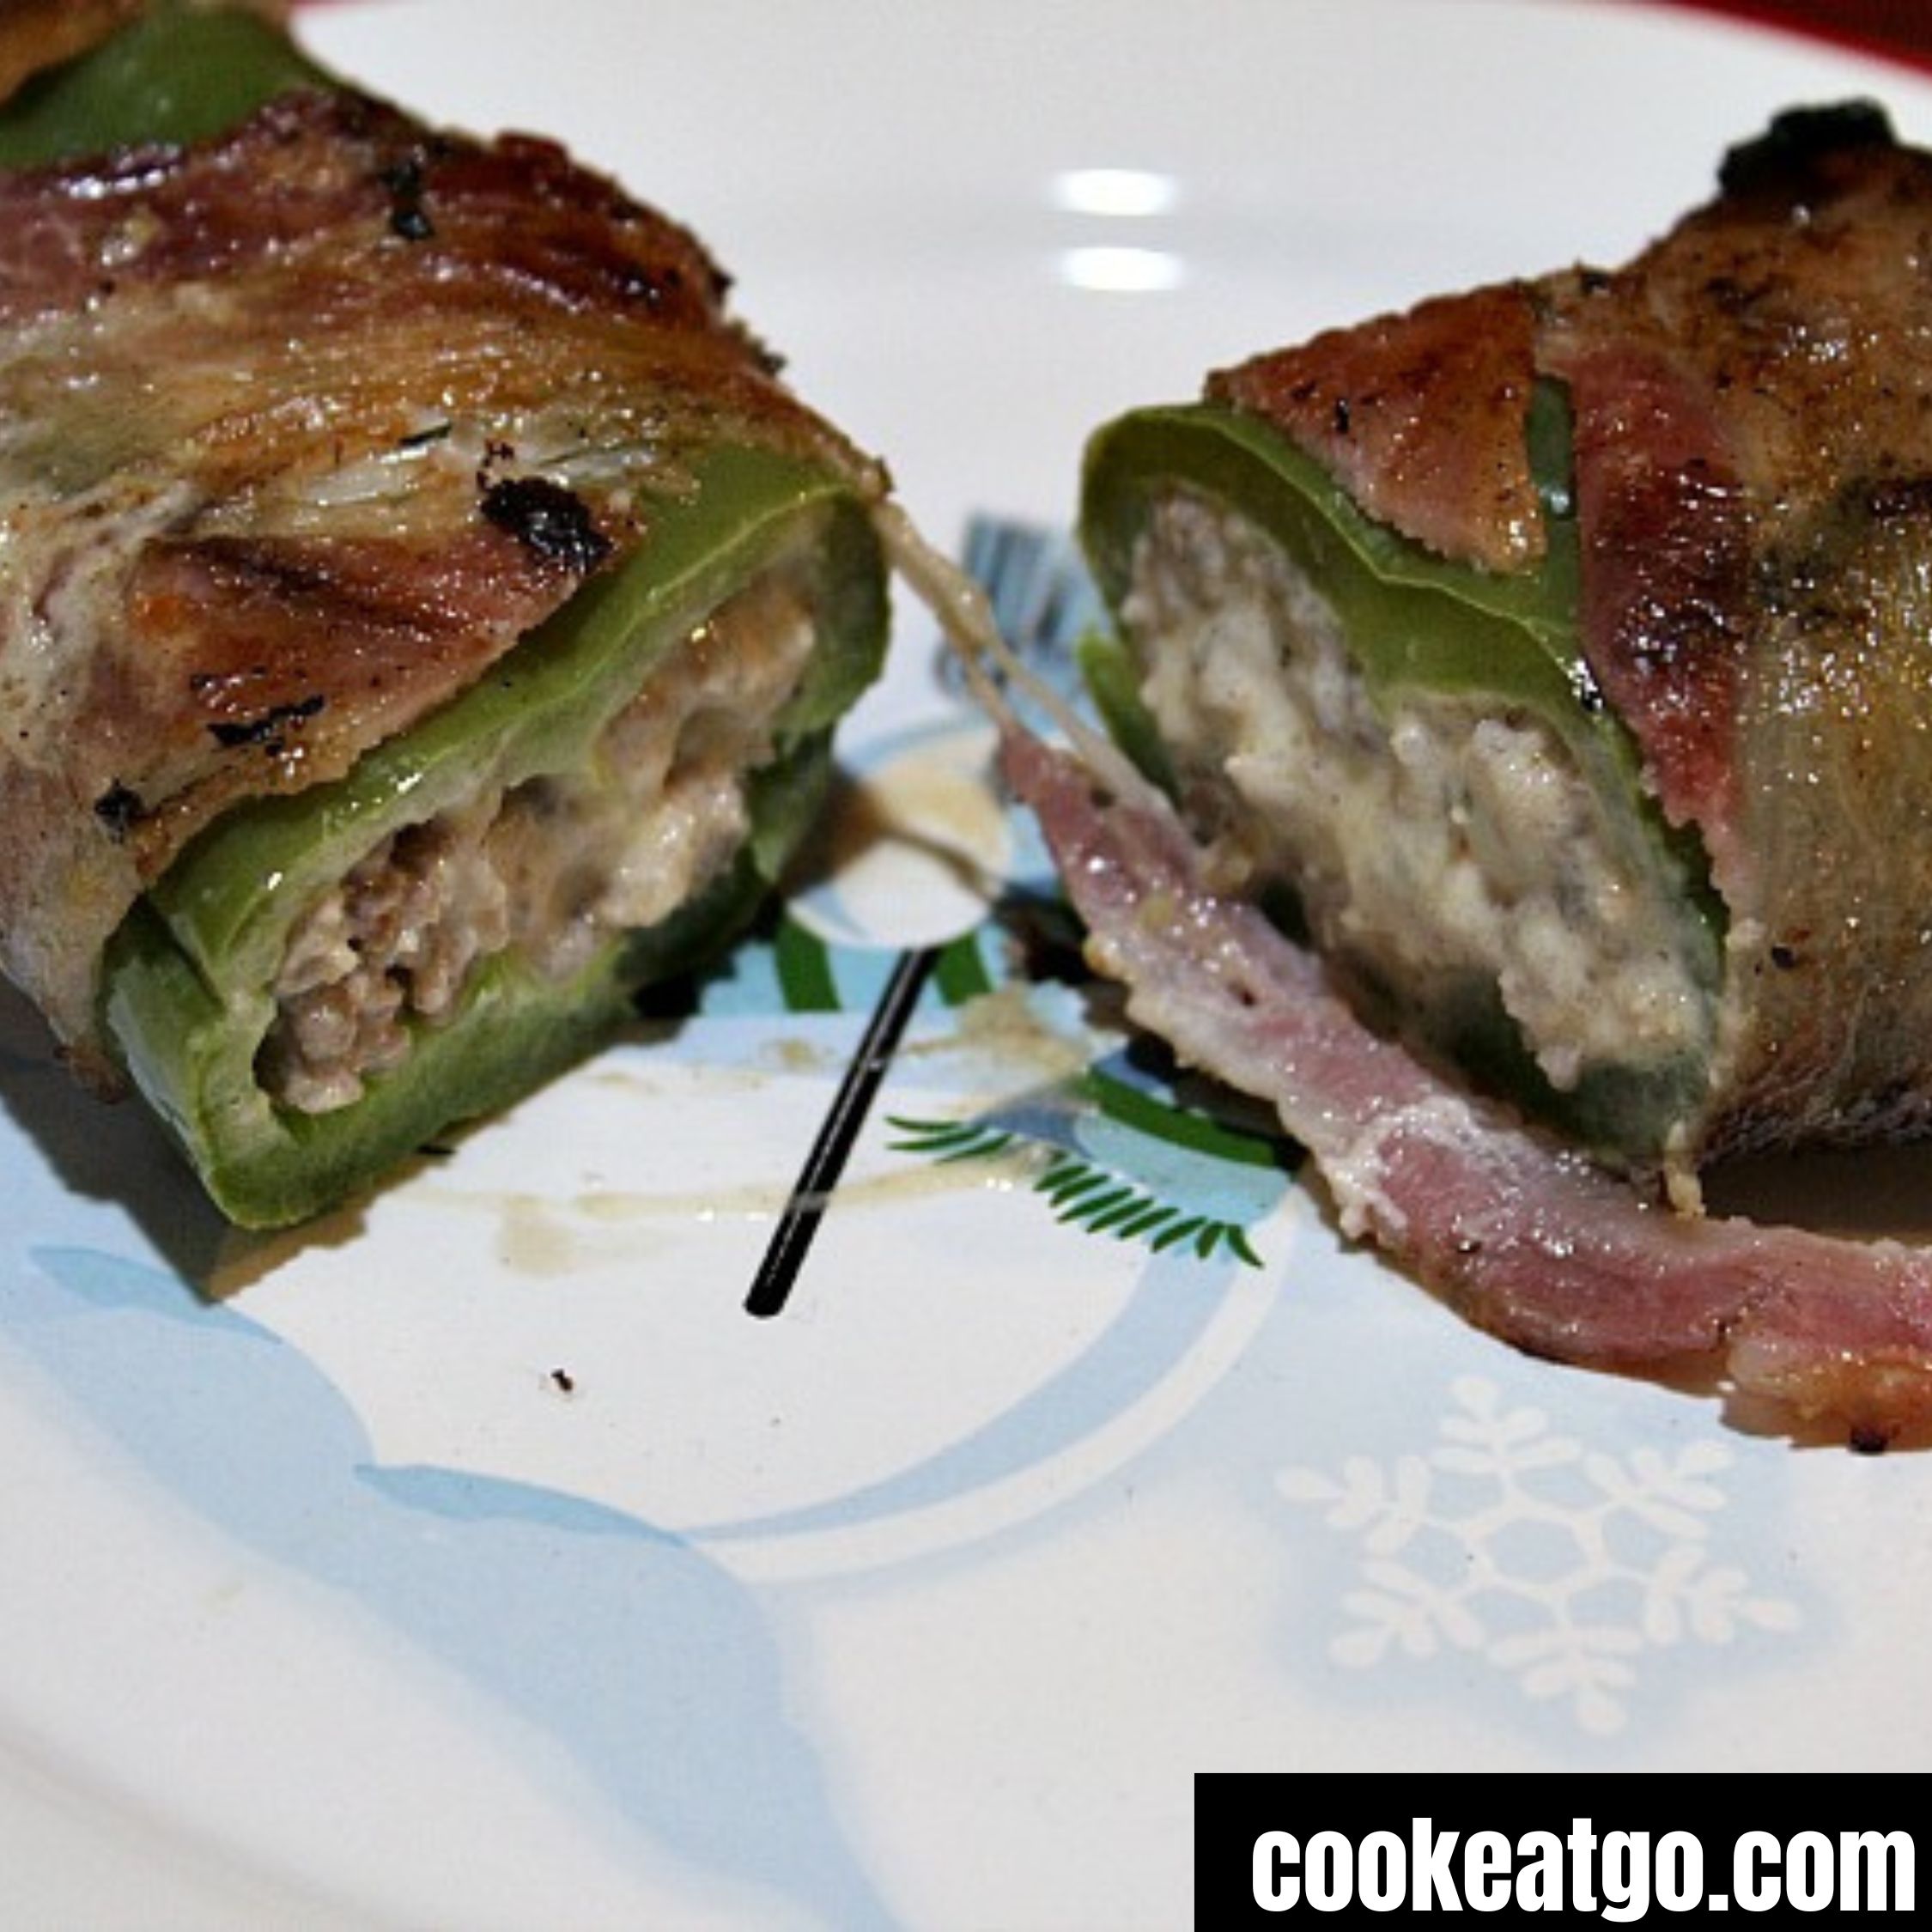 Grilled Bacon Wrapped Stuffed Anaheim Peppers on a plate